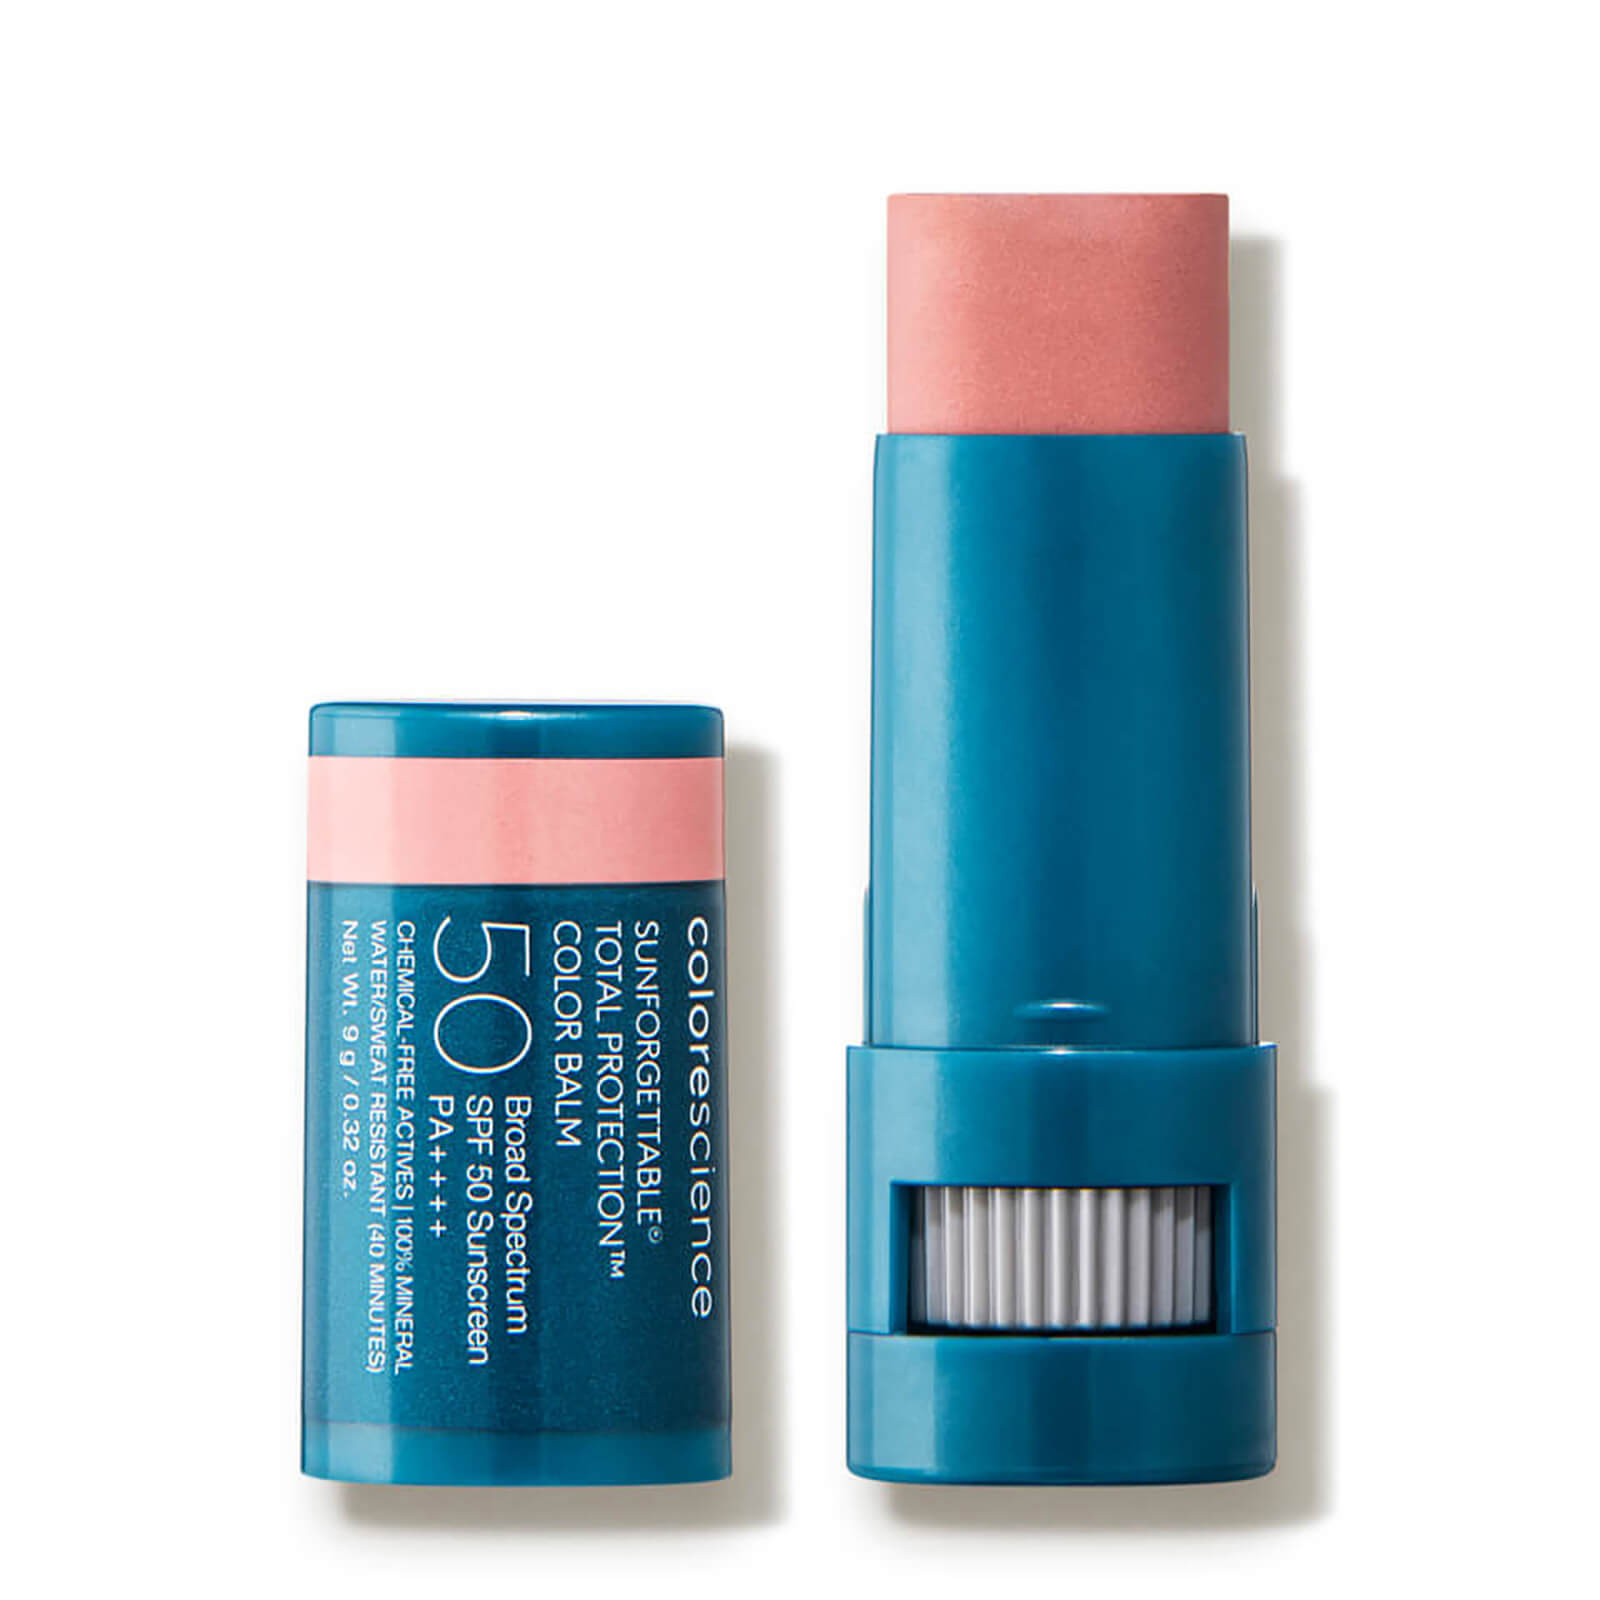 Colorescience Sunforgettable Total Protection Color Balm 0.32oz. (various Shades) In Blush